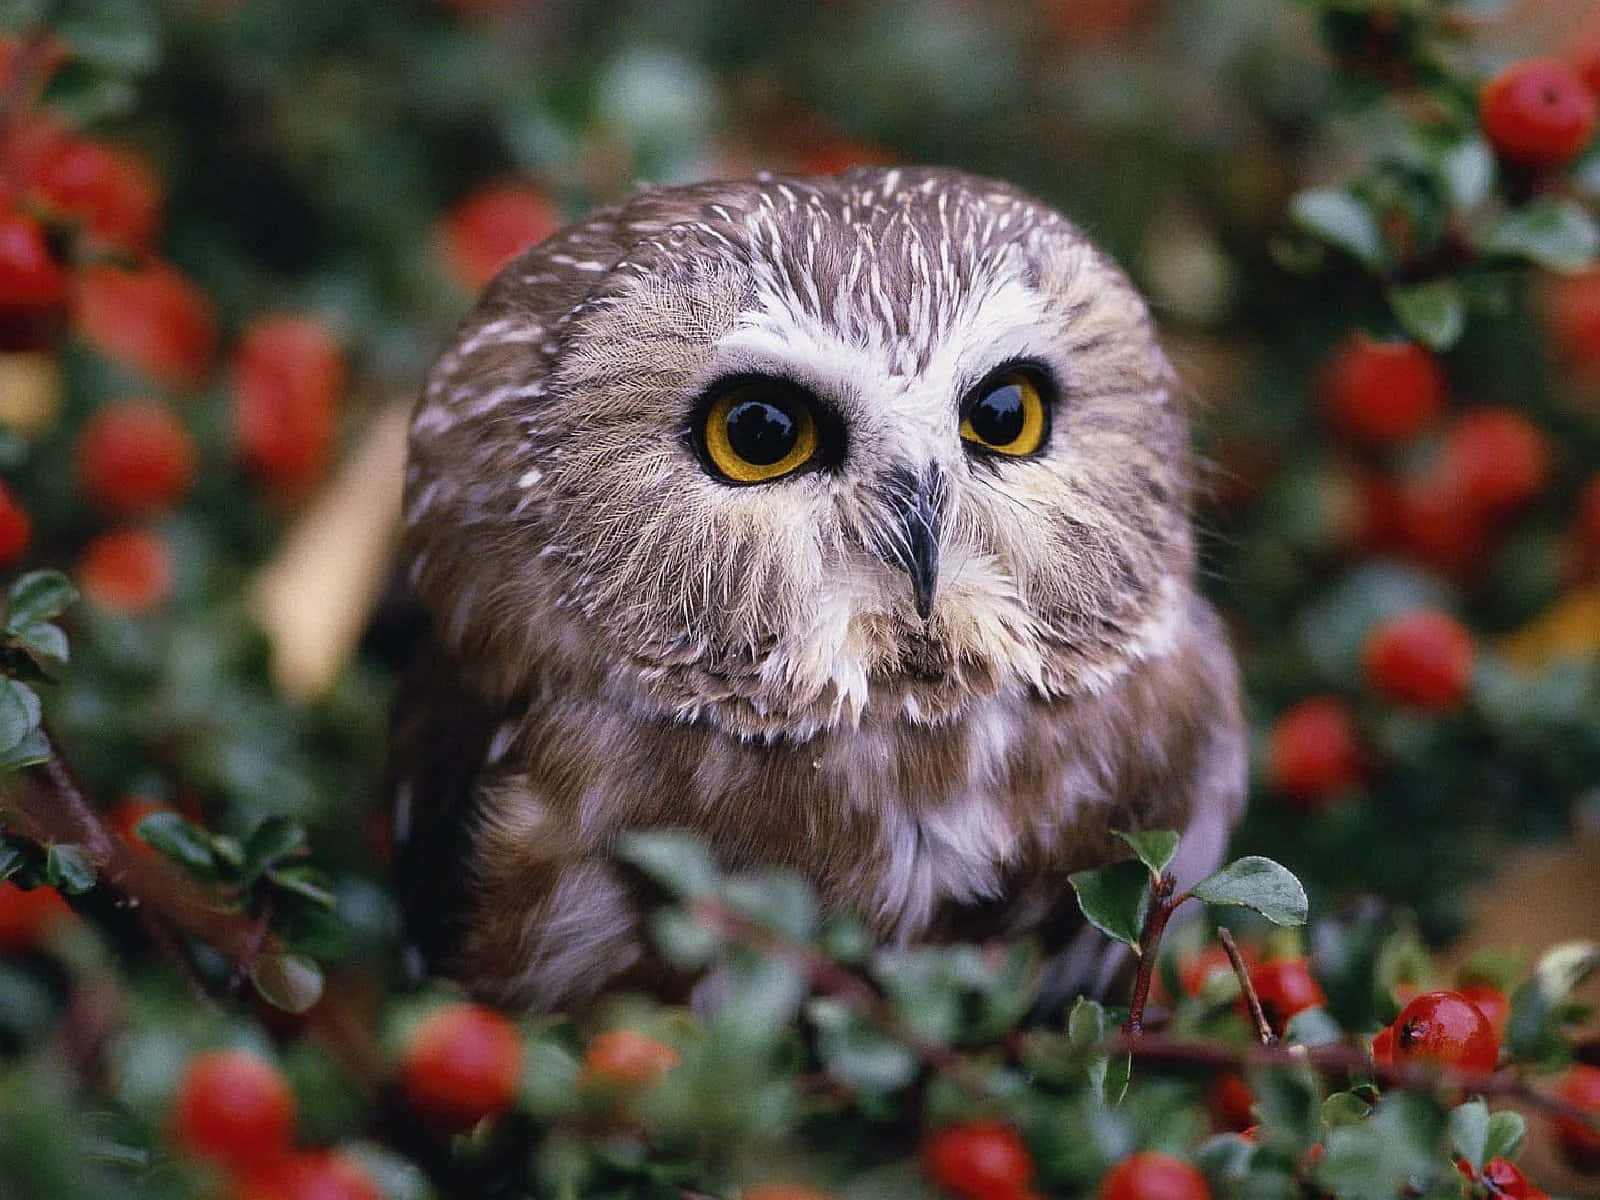 A Small Owl Is Sitting In A Bush With Red Berries